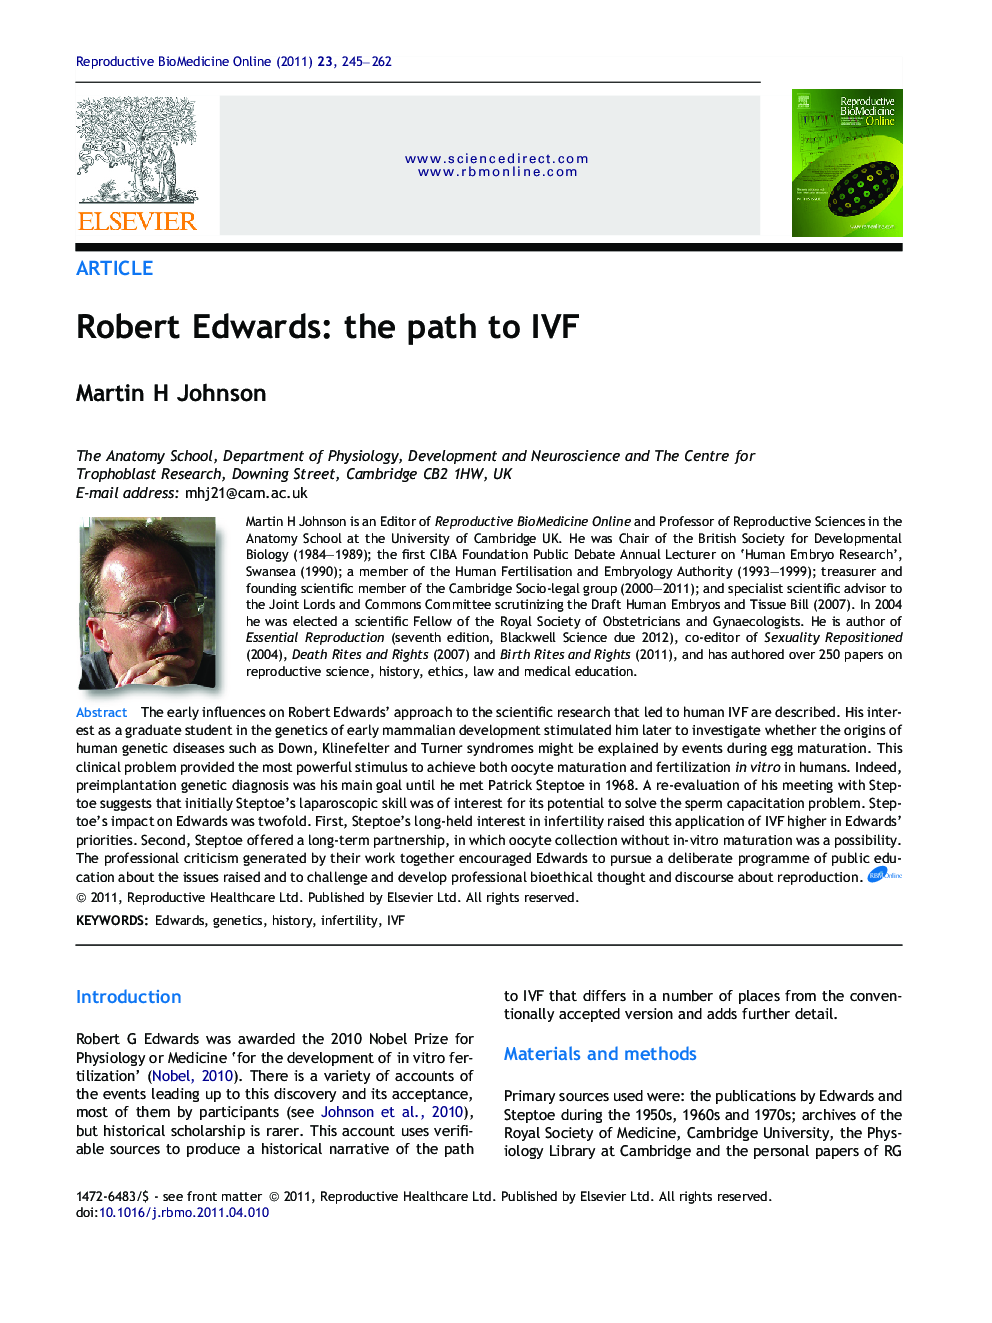 Robert Edwards: the path to IVF